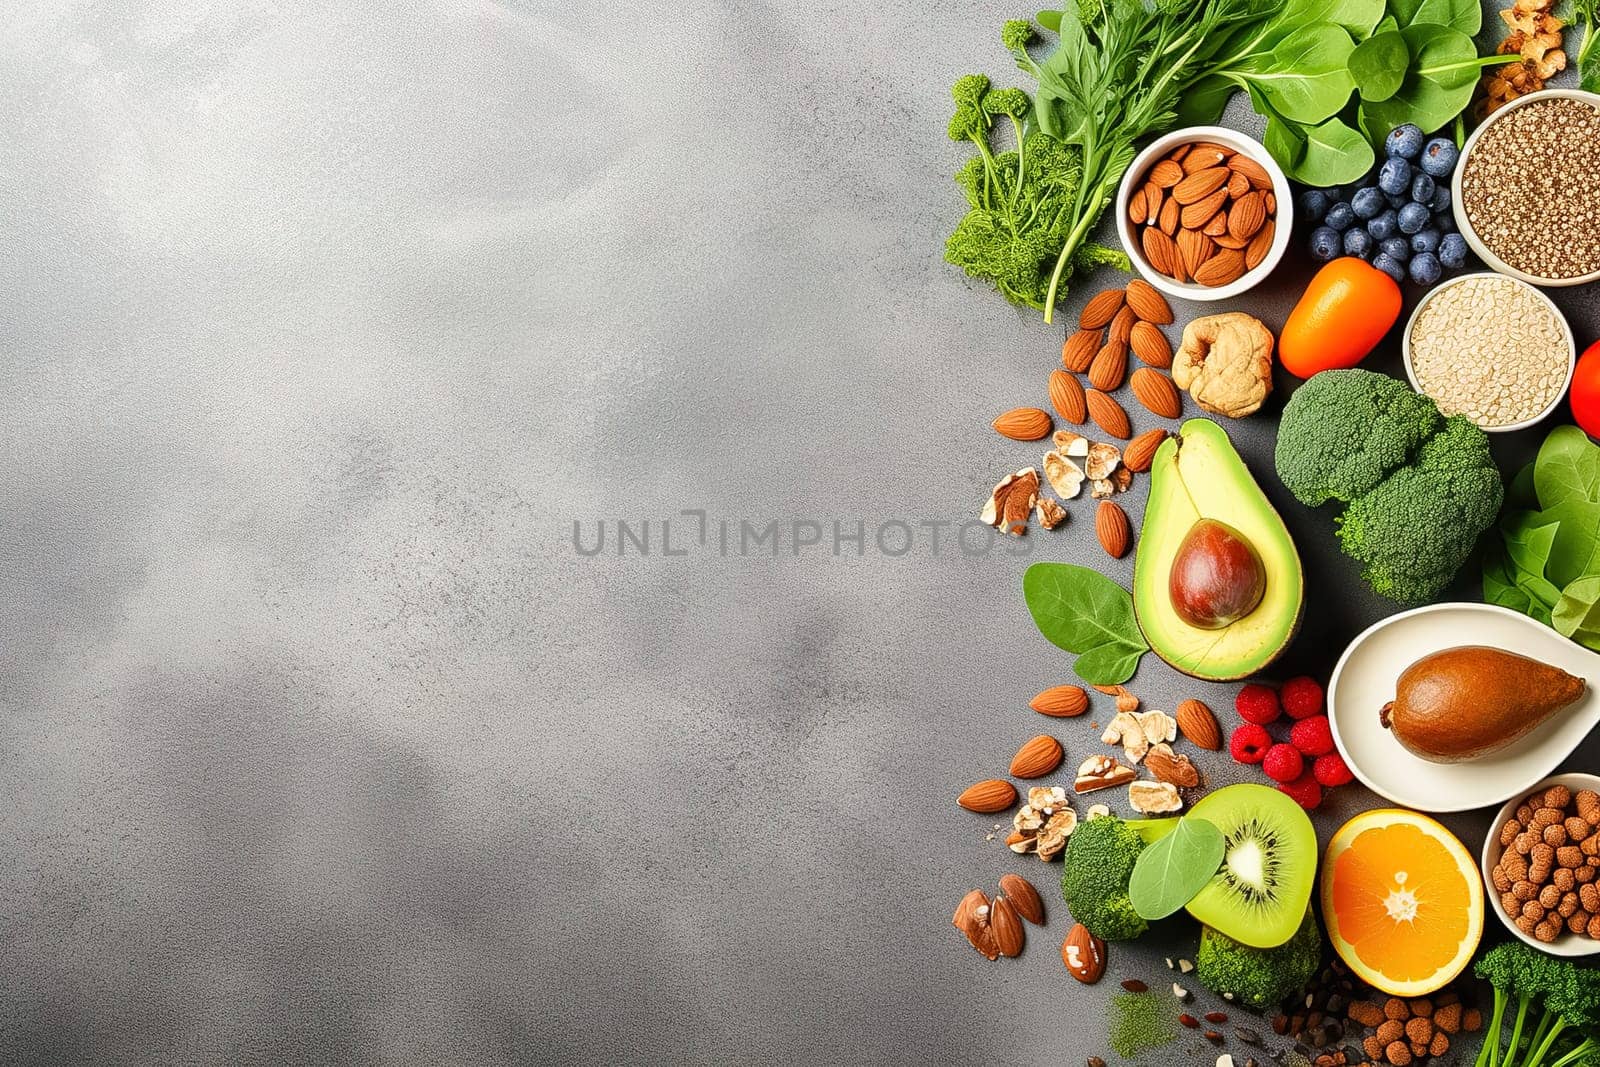 Assortment of spices, fruits, vegetables and nuts with empty space to insert text. by Yurich32